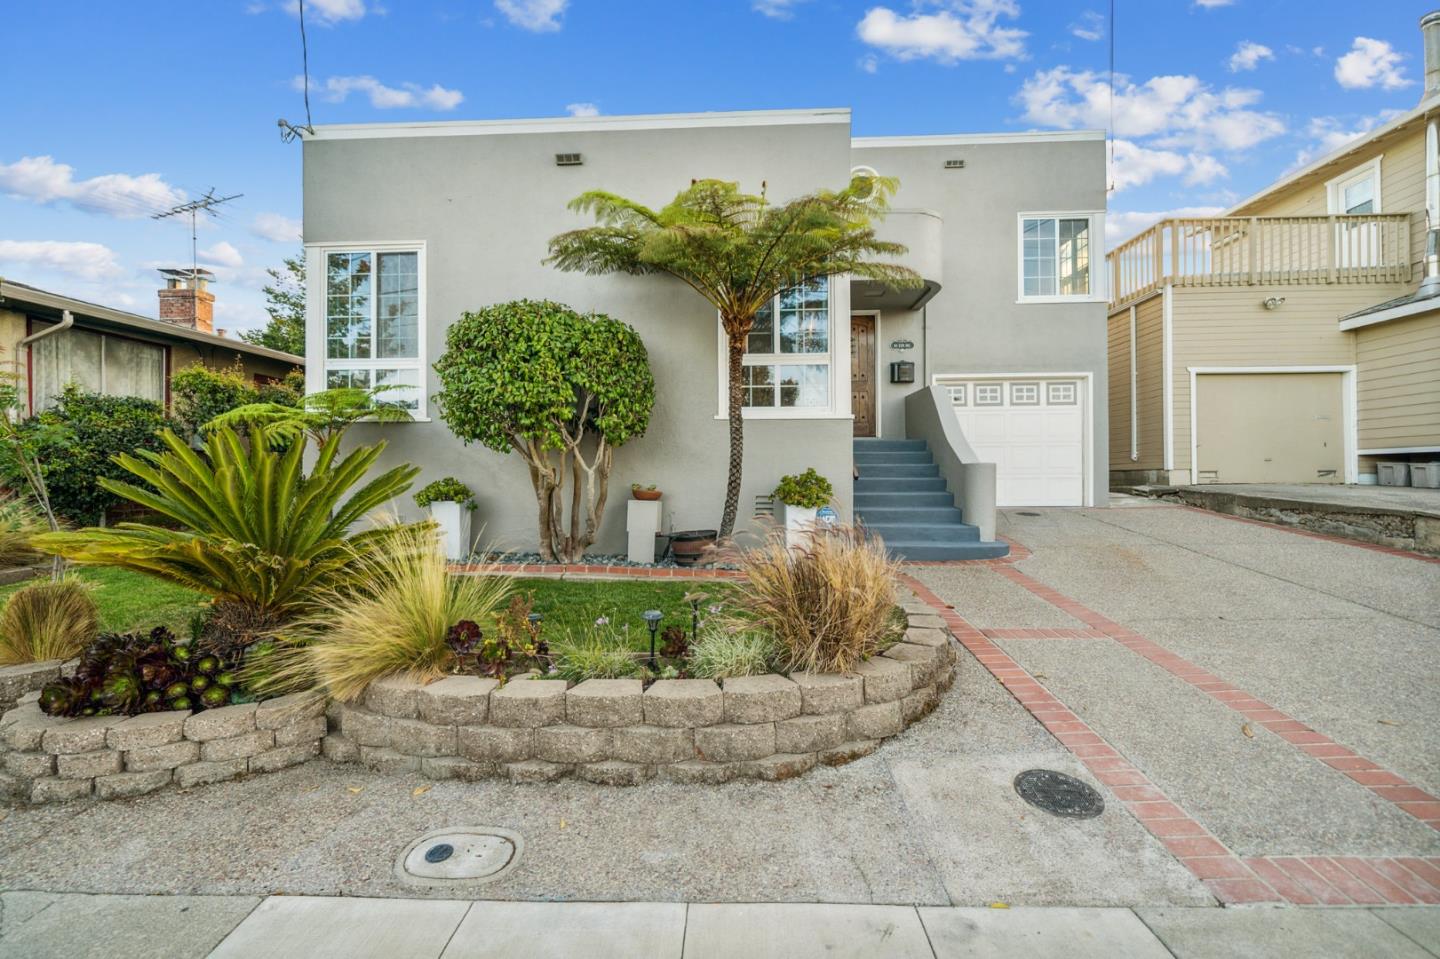 This beautiful 3 bedroom, 2 baths modern home is located on tree lined Elm avenue in Sunny San Bruno.  Feature include a remodeled kitchen with recessed lighting, quartz countertops, new sink, faucet, and new vinyl flooring.  The living room has a warm fireplace and vaulted ceilings with freshly stained hardwood floors.  The rear part of the house has an office or den, with a bedroom and bath on the first floor.  The upstairs has a large master bedroom, generous bathroom with an oversized shower and tub with jets.  The backyard is a green paradise with a patio area, faux grass, two storage sheds and both sun and shaded structure.  Owner believes the property is more than 1800 sf, on the buyer to confirm.  Disclosures available at https://app.disclosures.io/link/141-Elm-Avenue-57ro613p offers reviewed as they come.